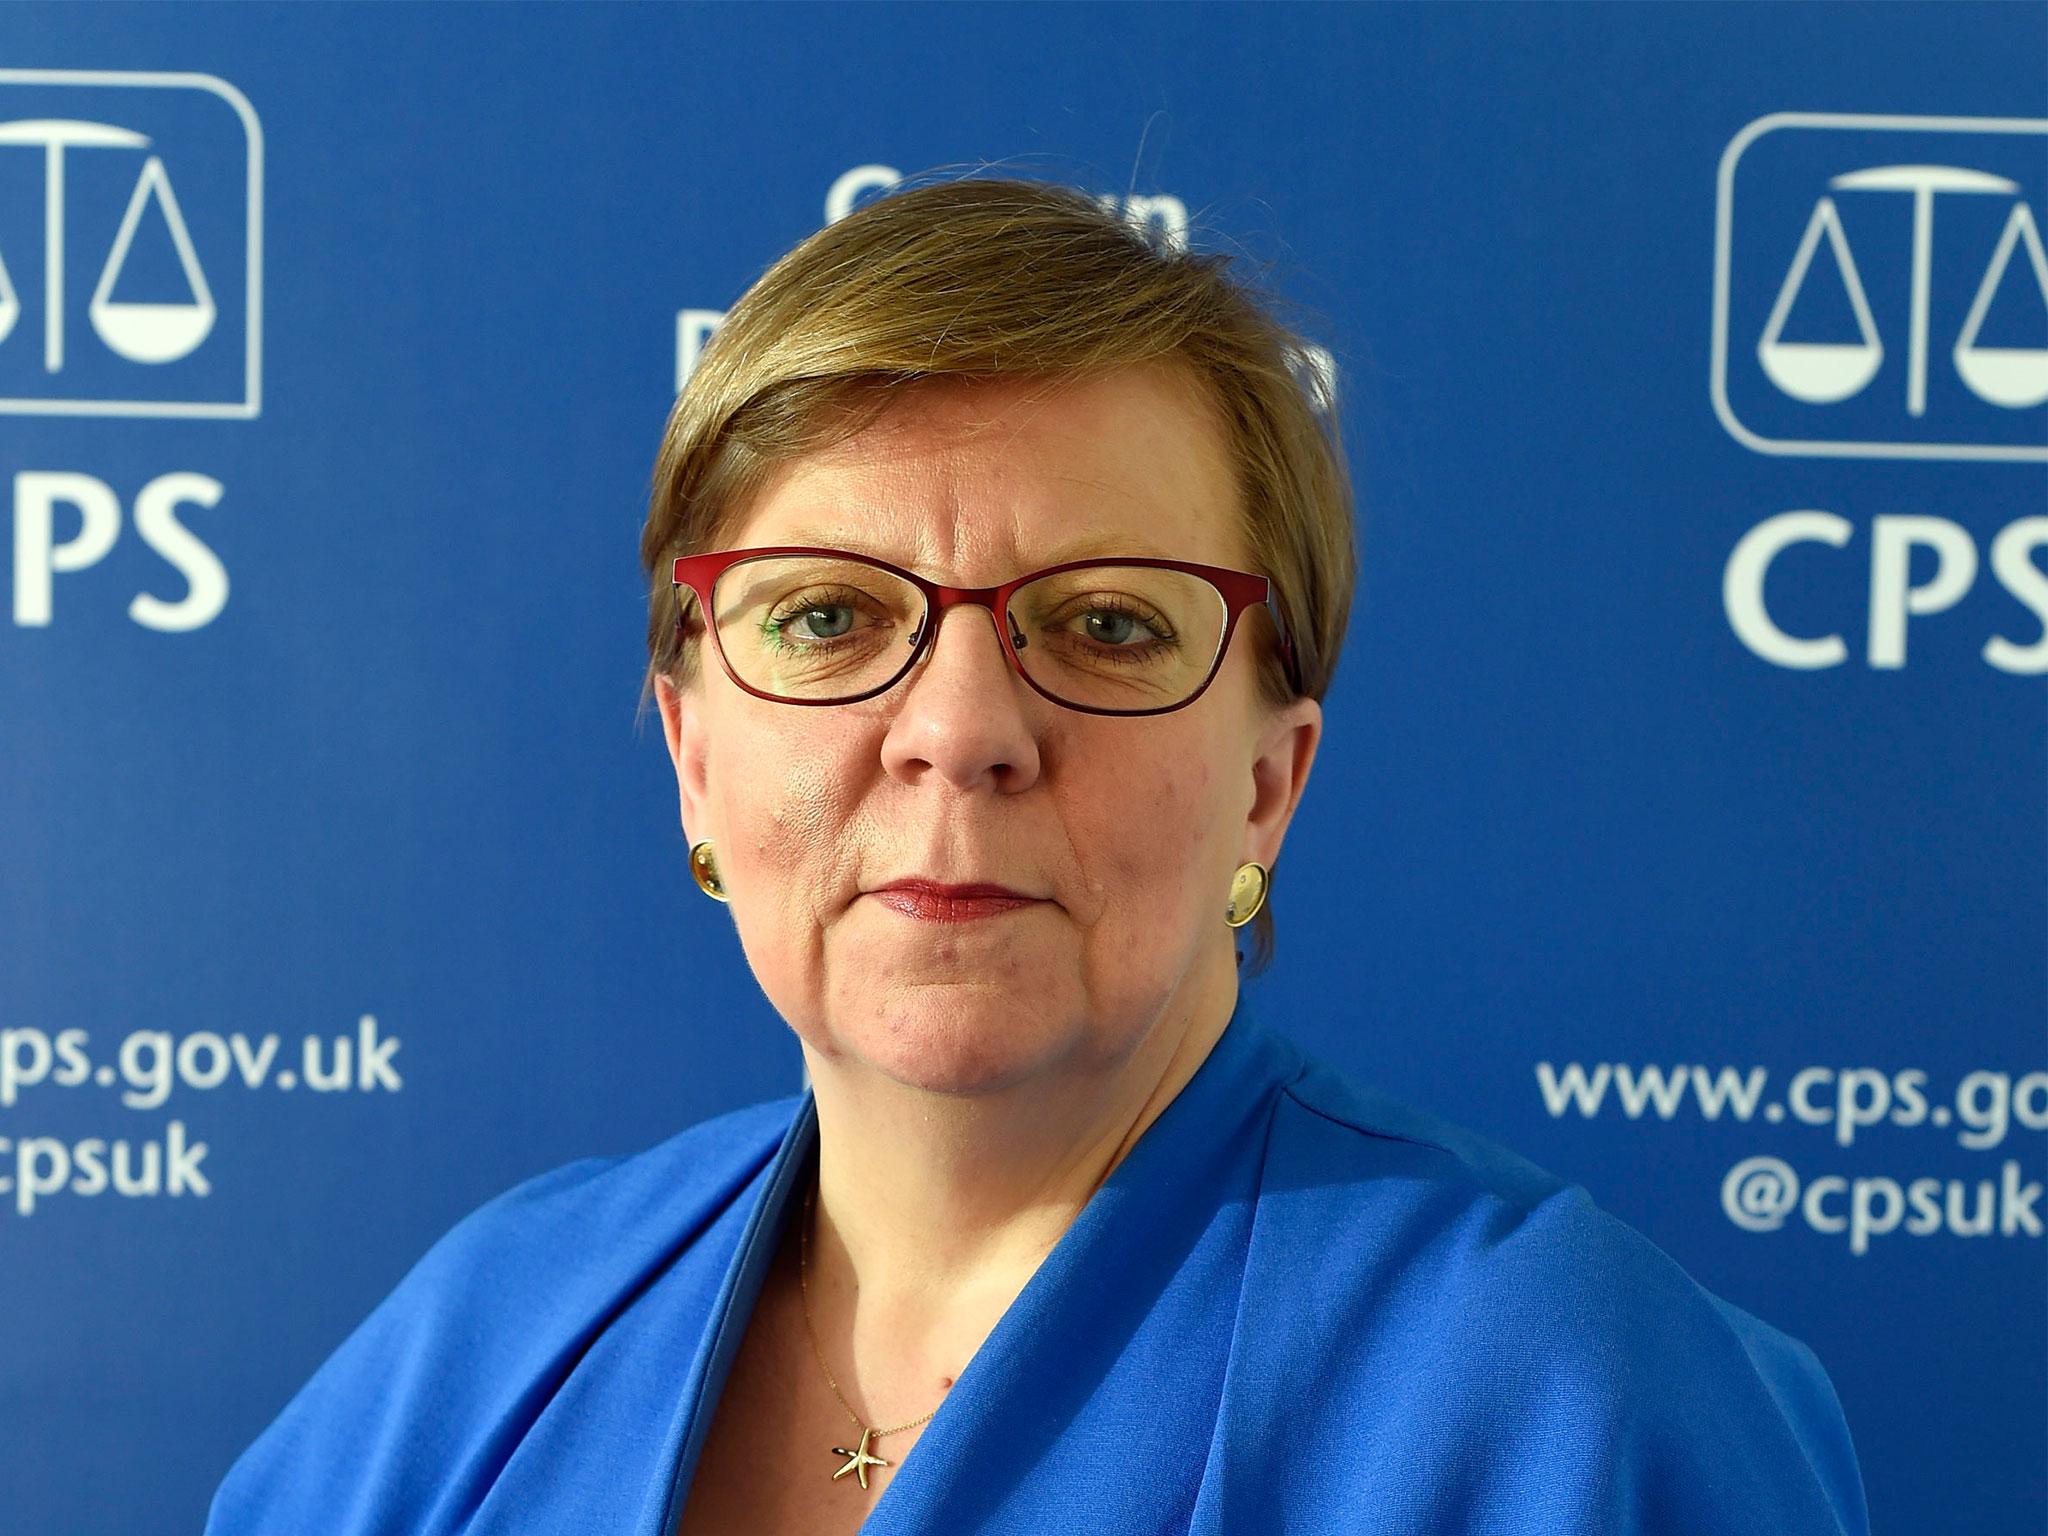 Director of public prosecutions Alison Saunders conceded that the CPS was 'falling short' after 47 prosecutions for rape or serious sexual offences were stopped in the first six weeks of this year